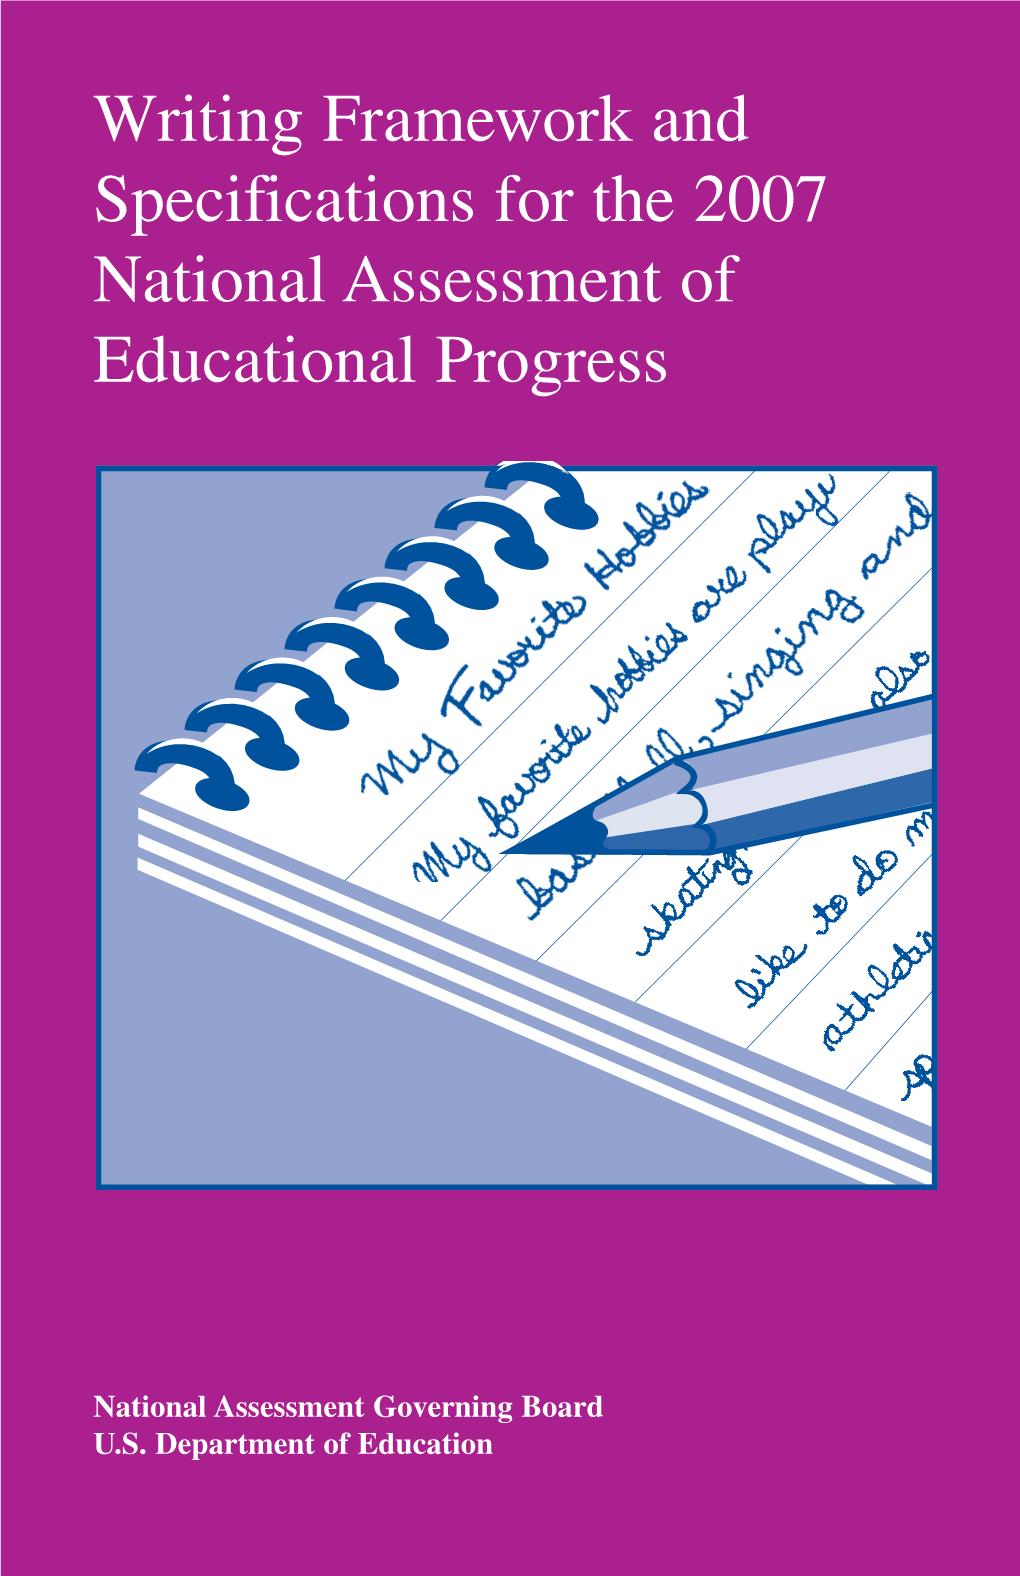 Writing Framework and Specifications for the 2007 National Assessment of Educational Progress